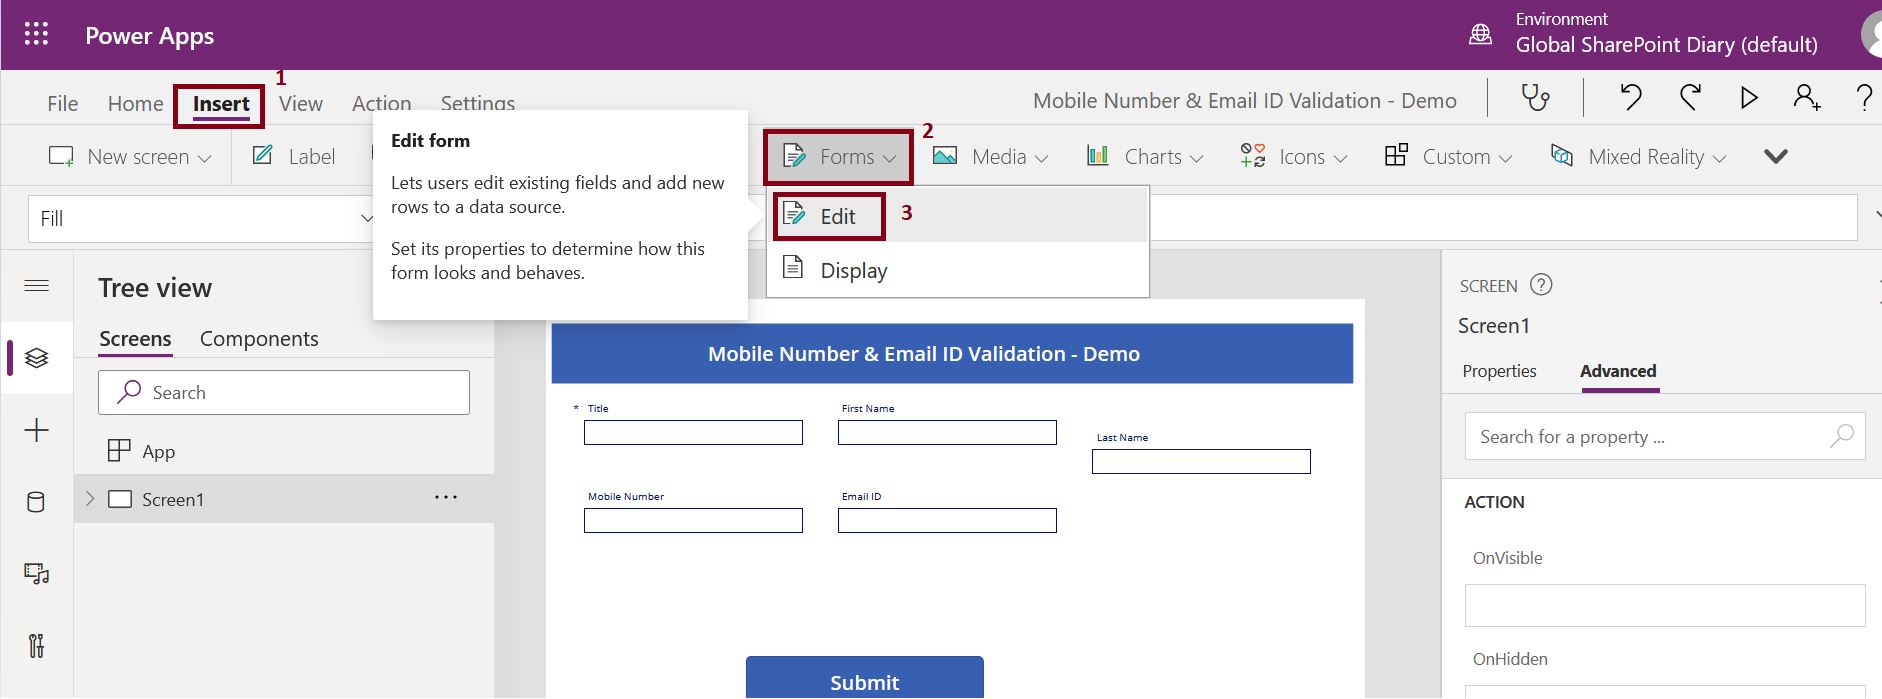 How to add form control in PowerApps Canvas App?